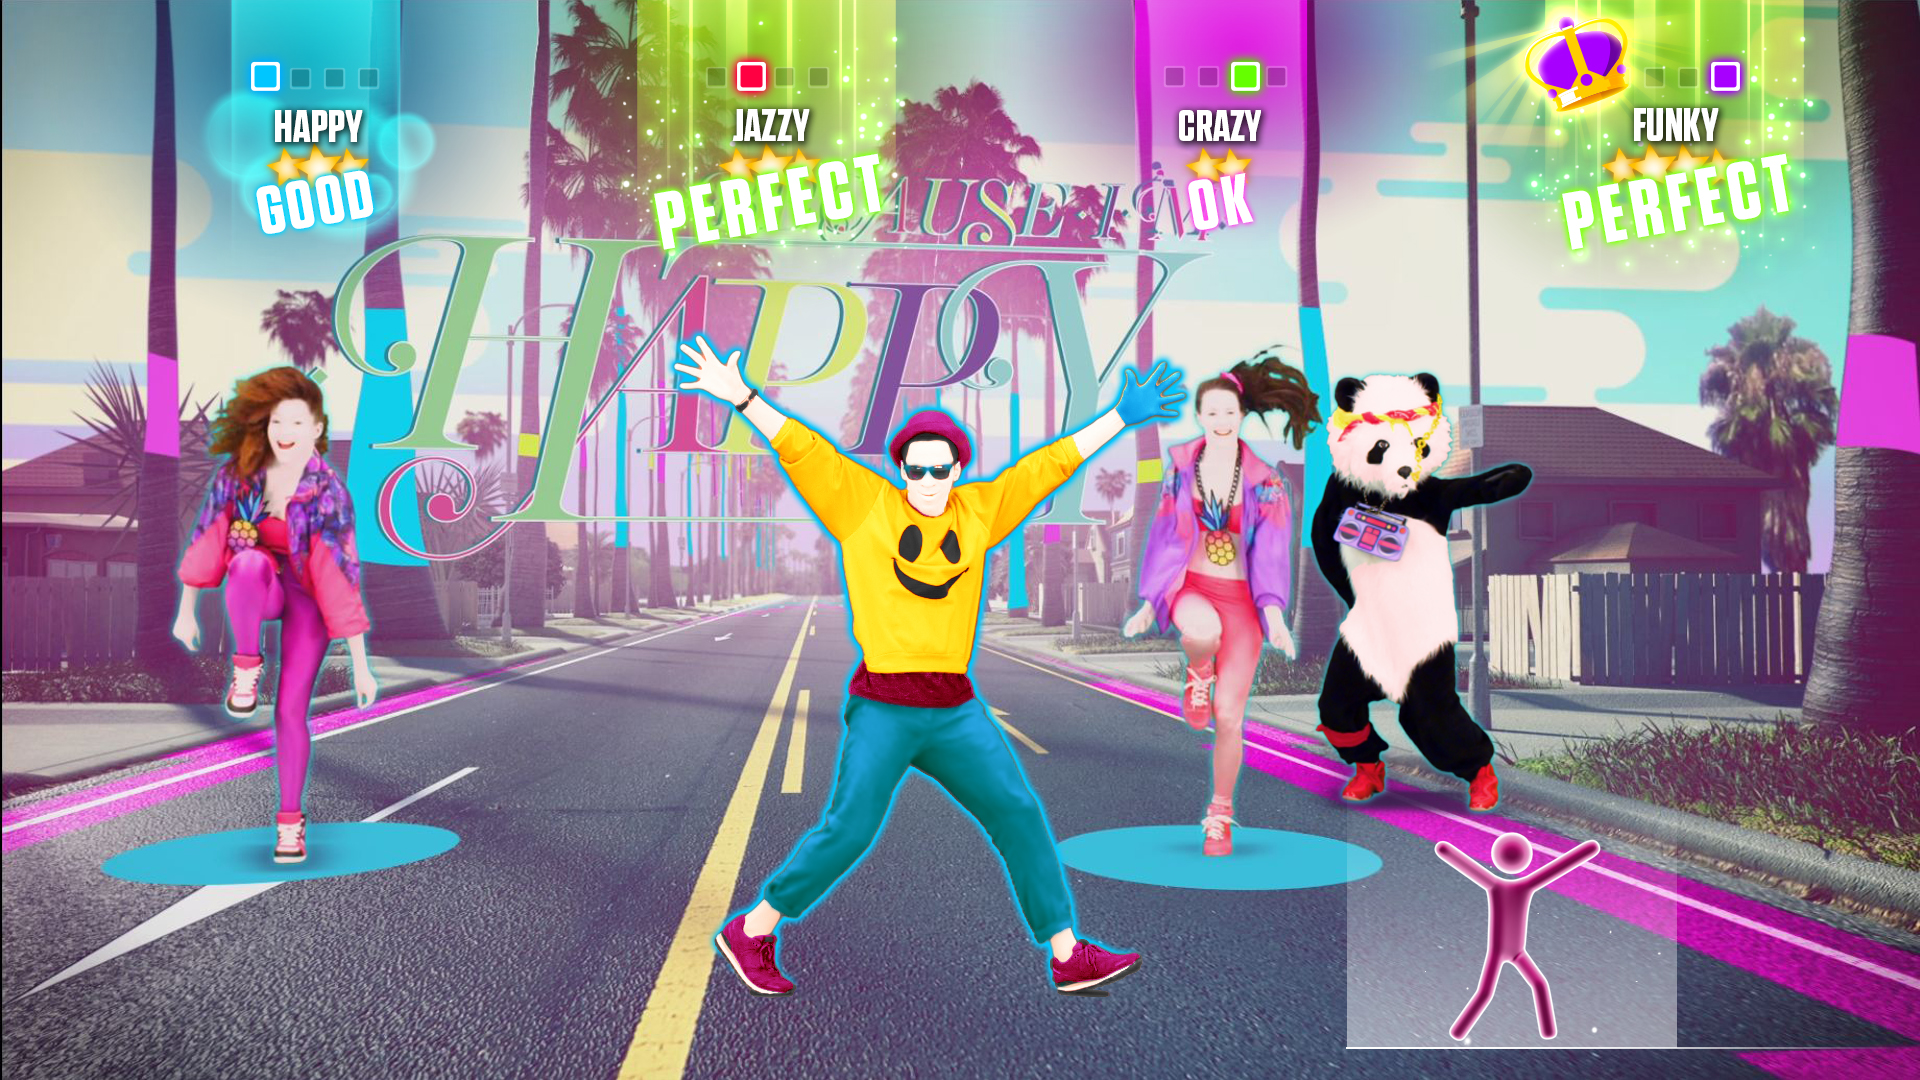 Just game перевод. Just Dance 2015 Xbox 360. Just Dance 2016 (Xbox one) обложка. Just Dance 3 Xbox 360. Xbox 360 Kinect just Dance.